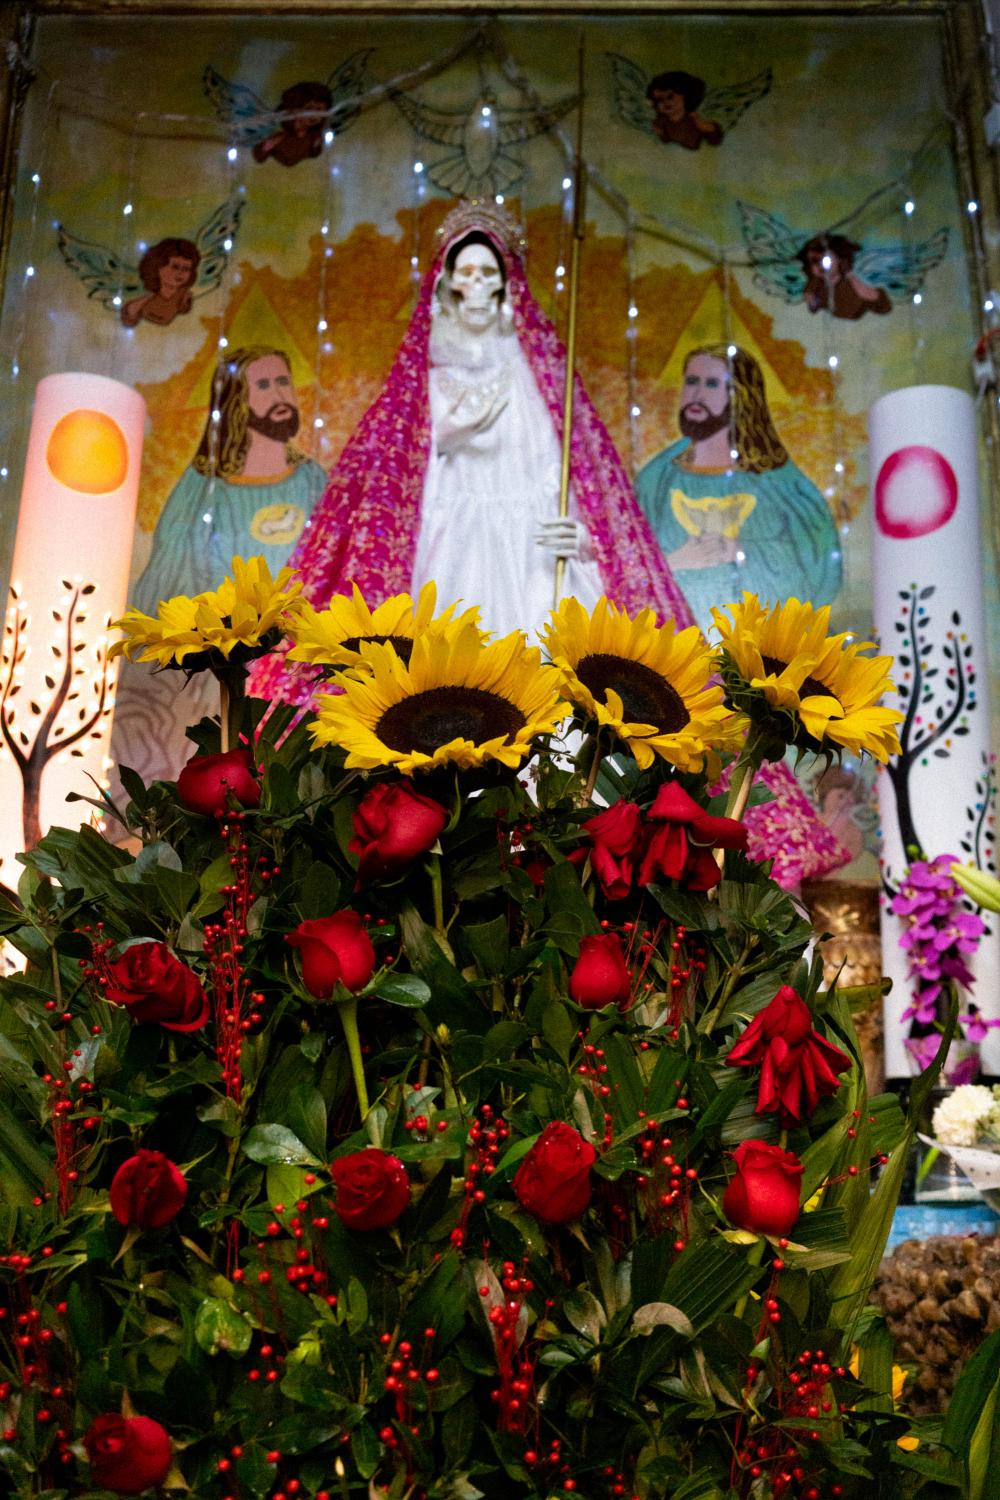 Tell Me Your Prayers - "The skinny one (La Santa Muerte) comes for...